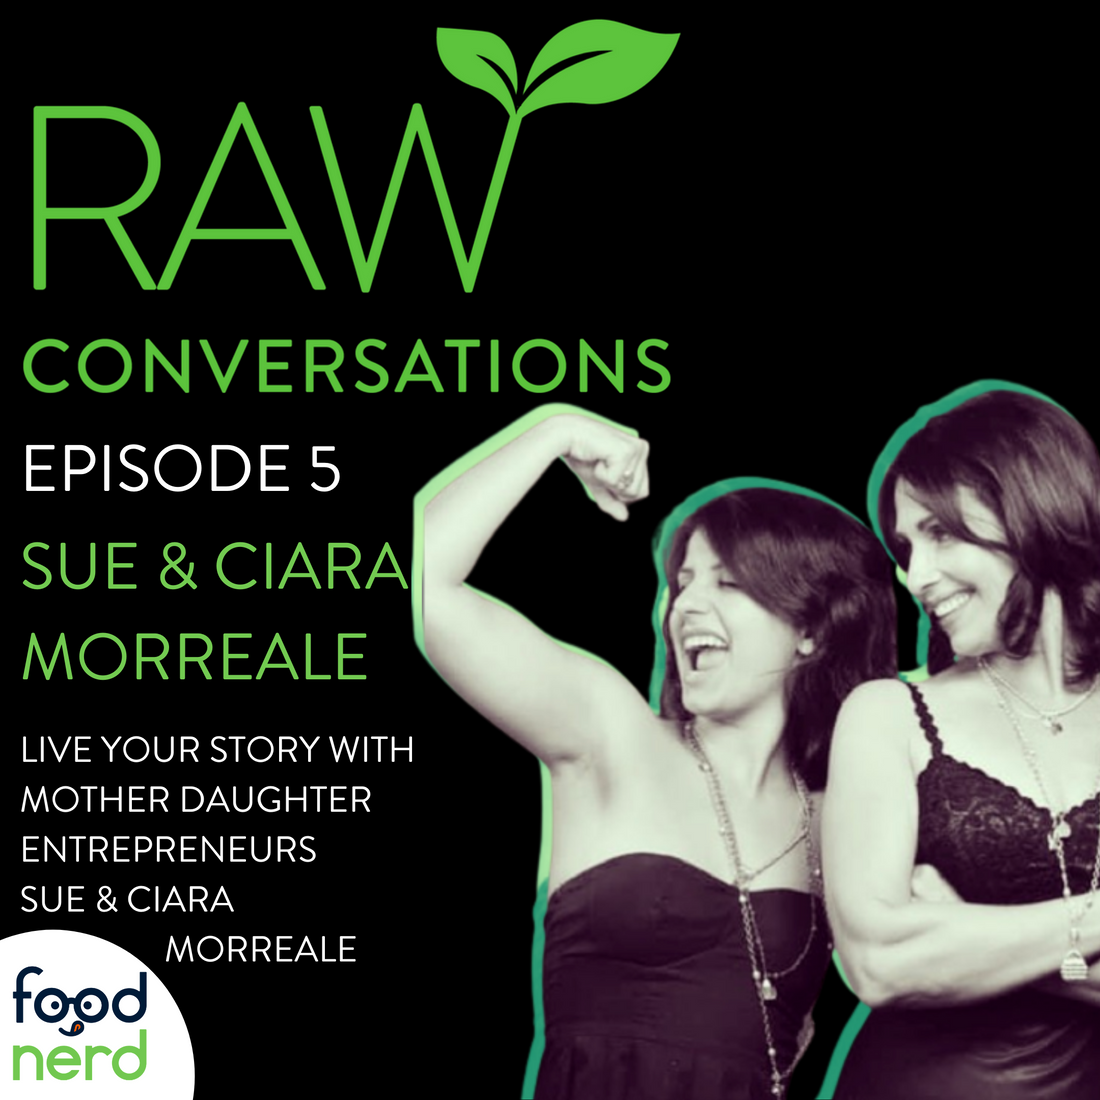 Raw Conversations Episode 5: Live Your Story with Mother/Daughter Entrepreneurs Sue and Ciara Morreale